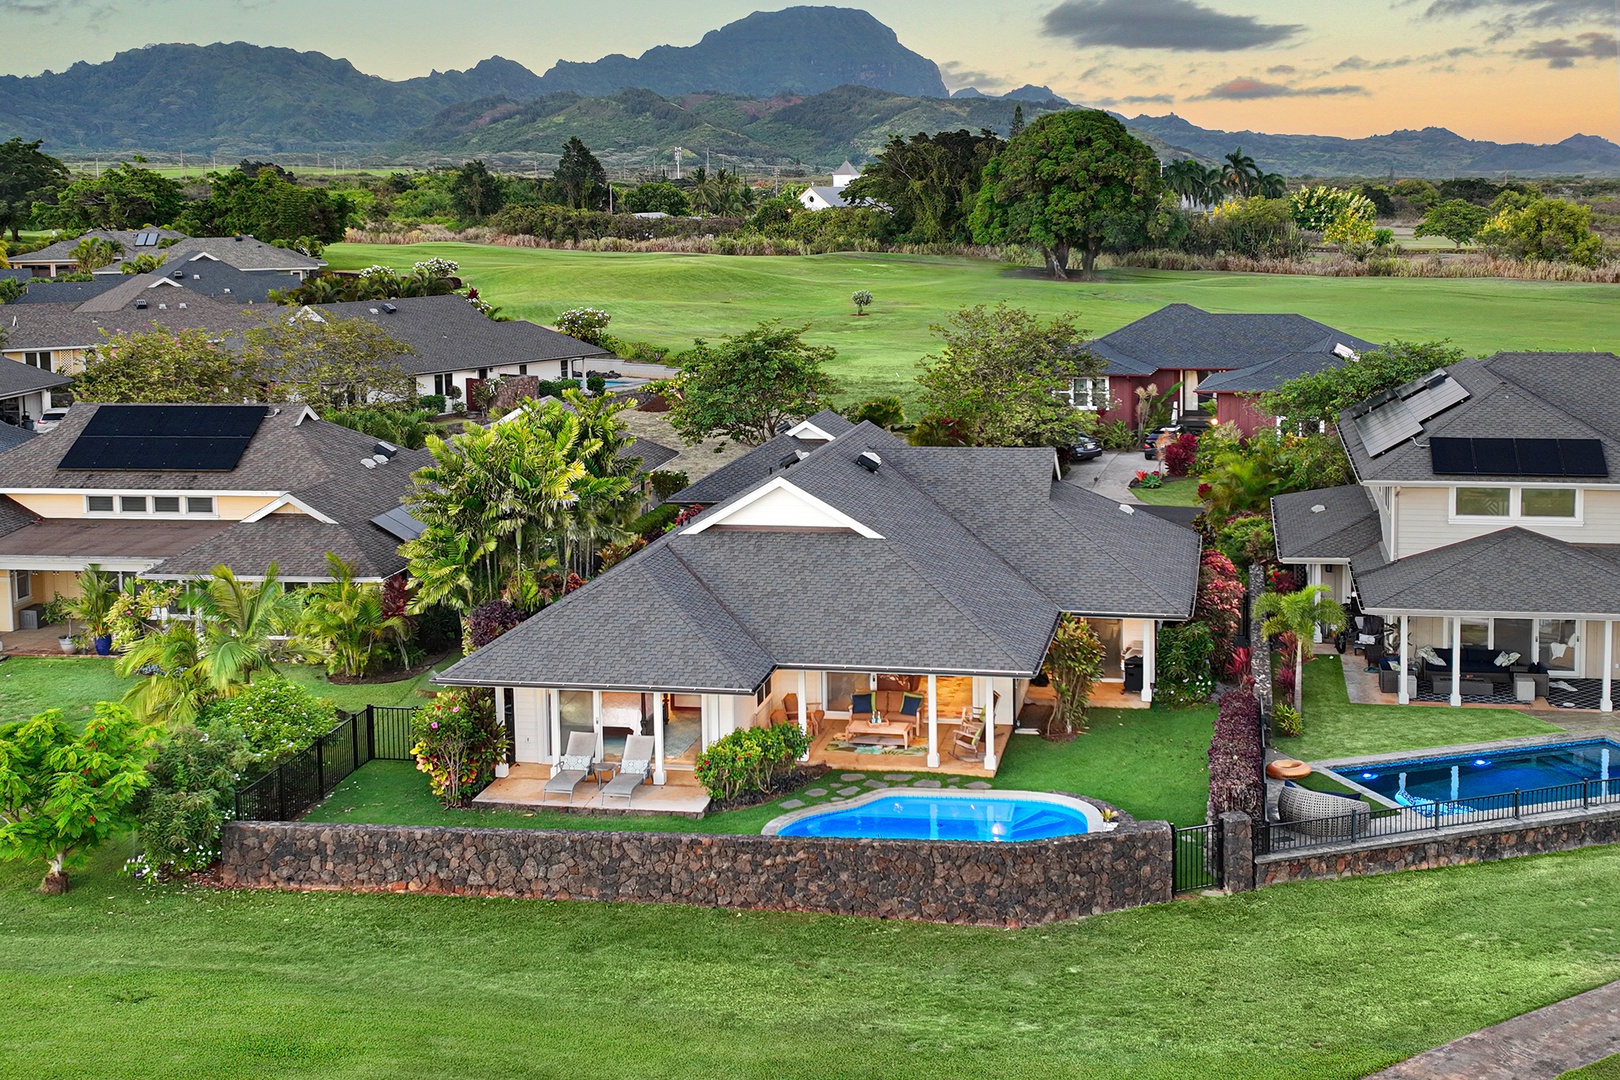 Koloa Vacation Rentals, Kiahuna Lani at Poipu - Aerial view with beautiful mountains in the distant